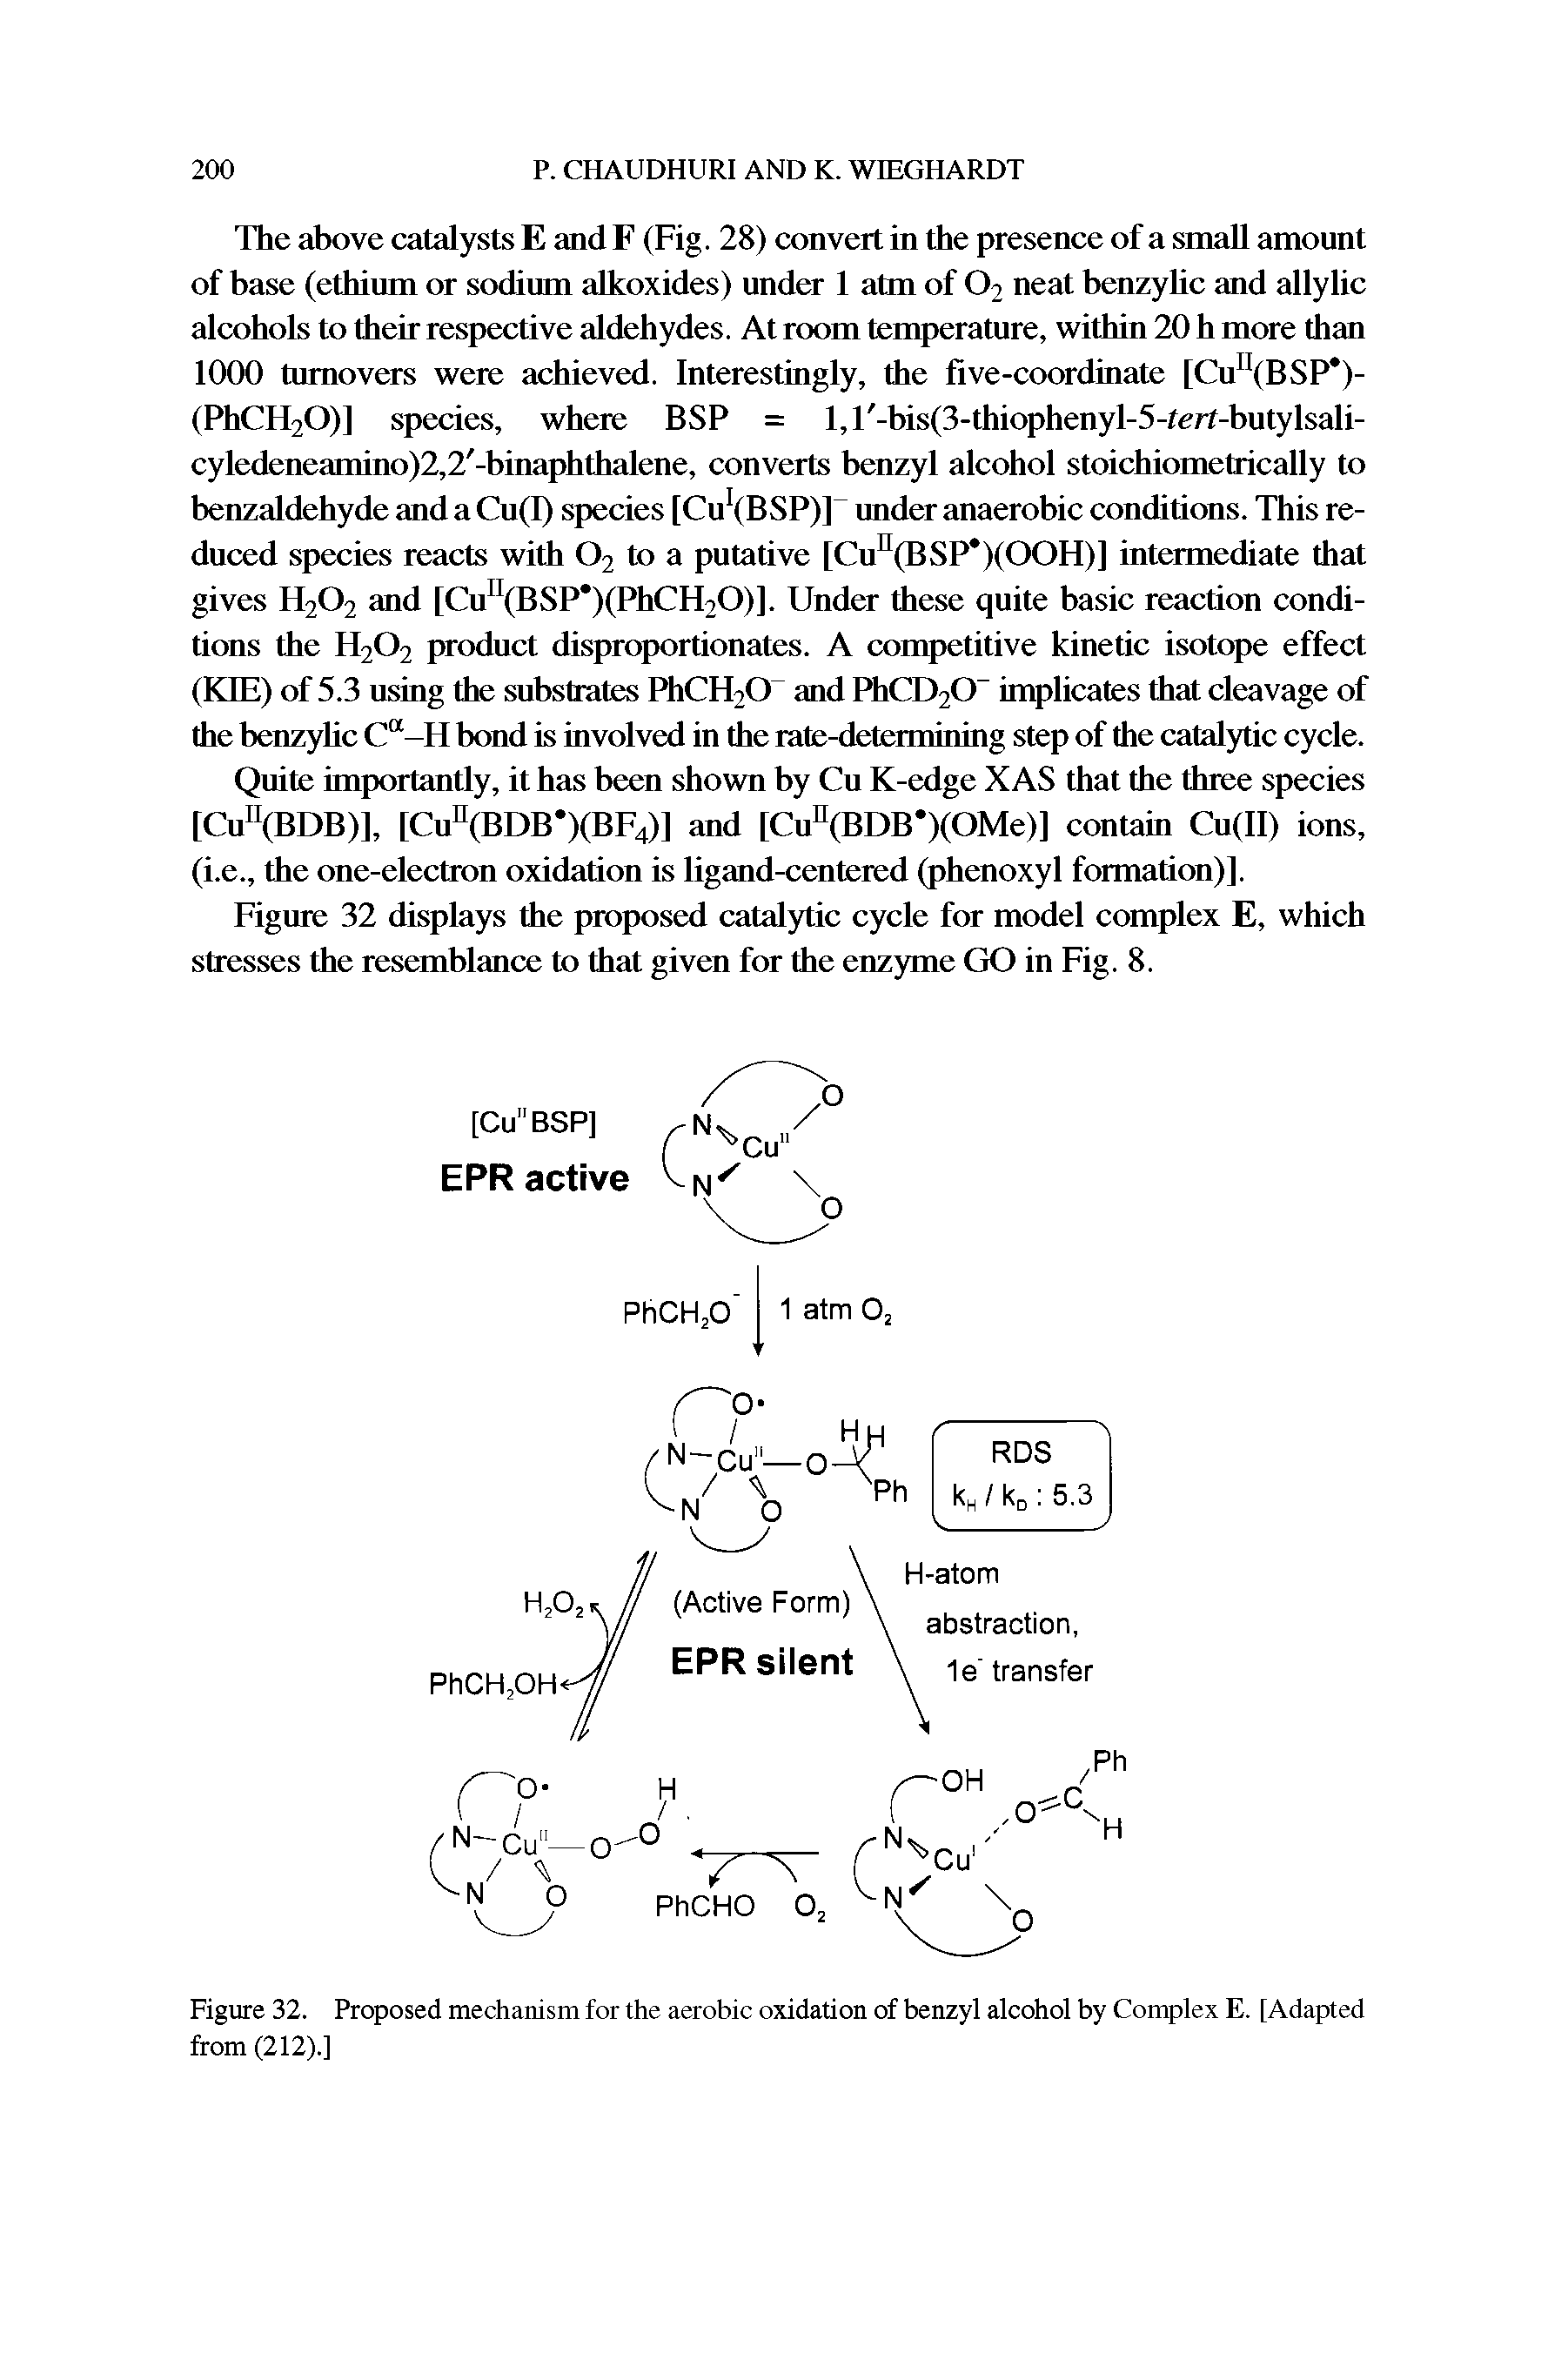 Figure 32. Proposed mechanism for the aerobic oxidation of benzyl alcohol by Complex E. [Adapted from (212).]...